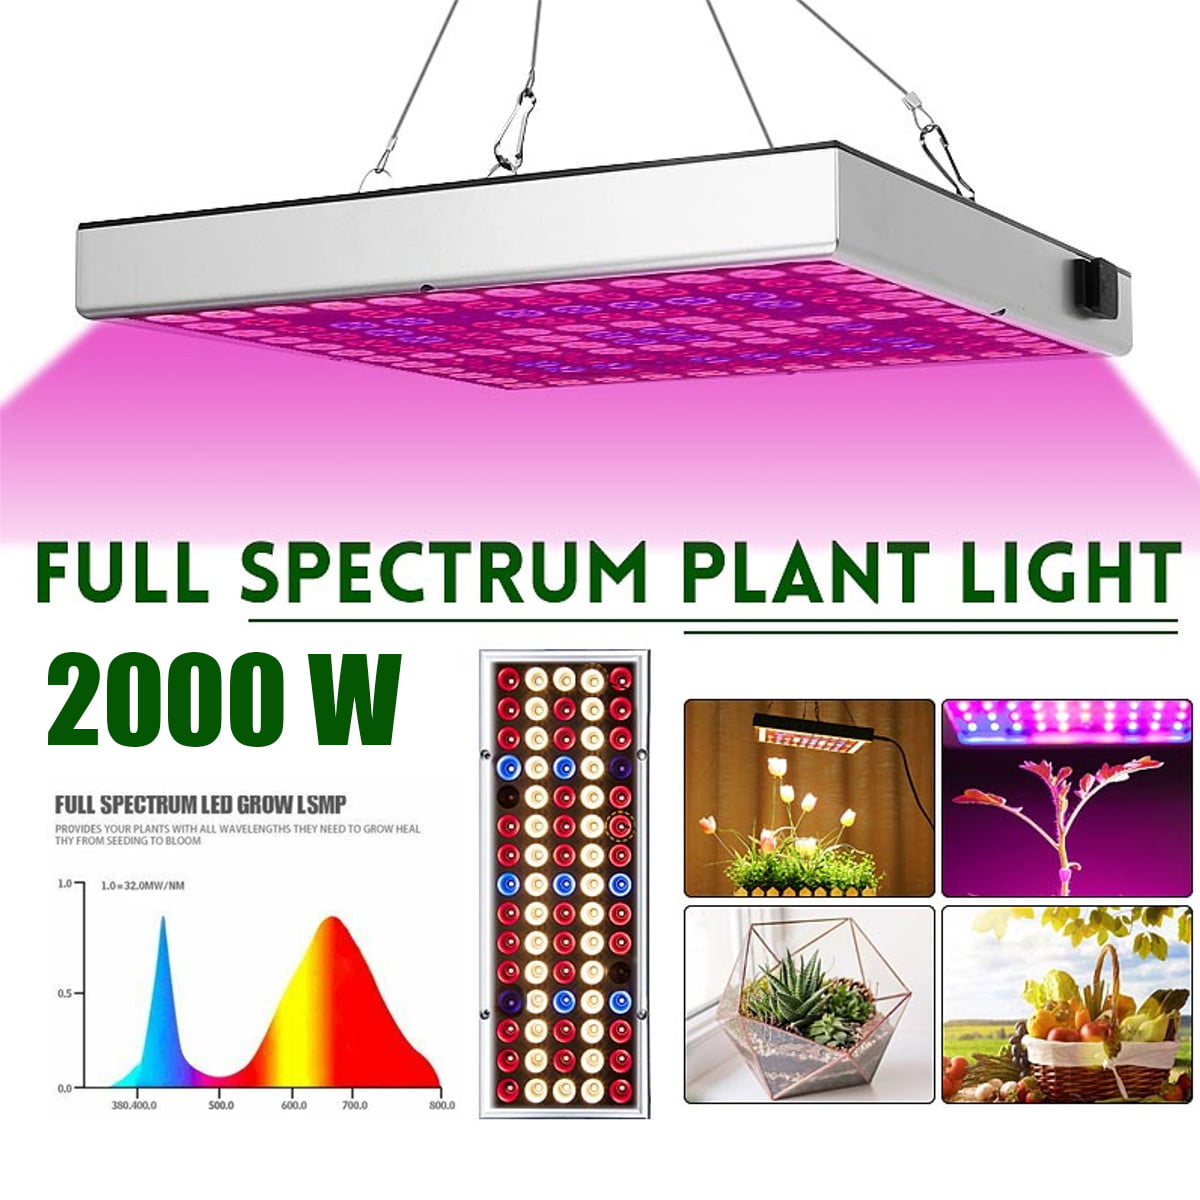 2000W 2009 LED Grow Light Panel Growing Lamp For Veg Hydroponic Indoor Plant US 